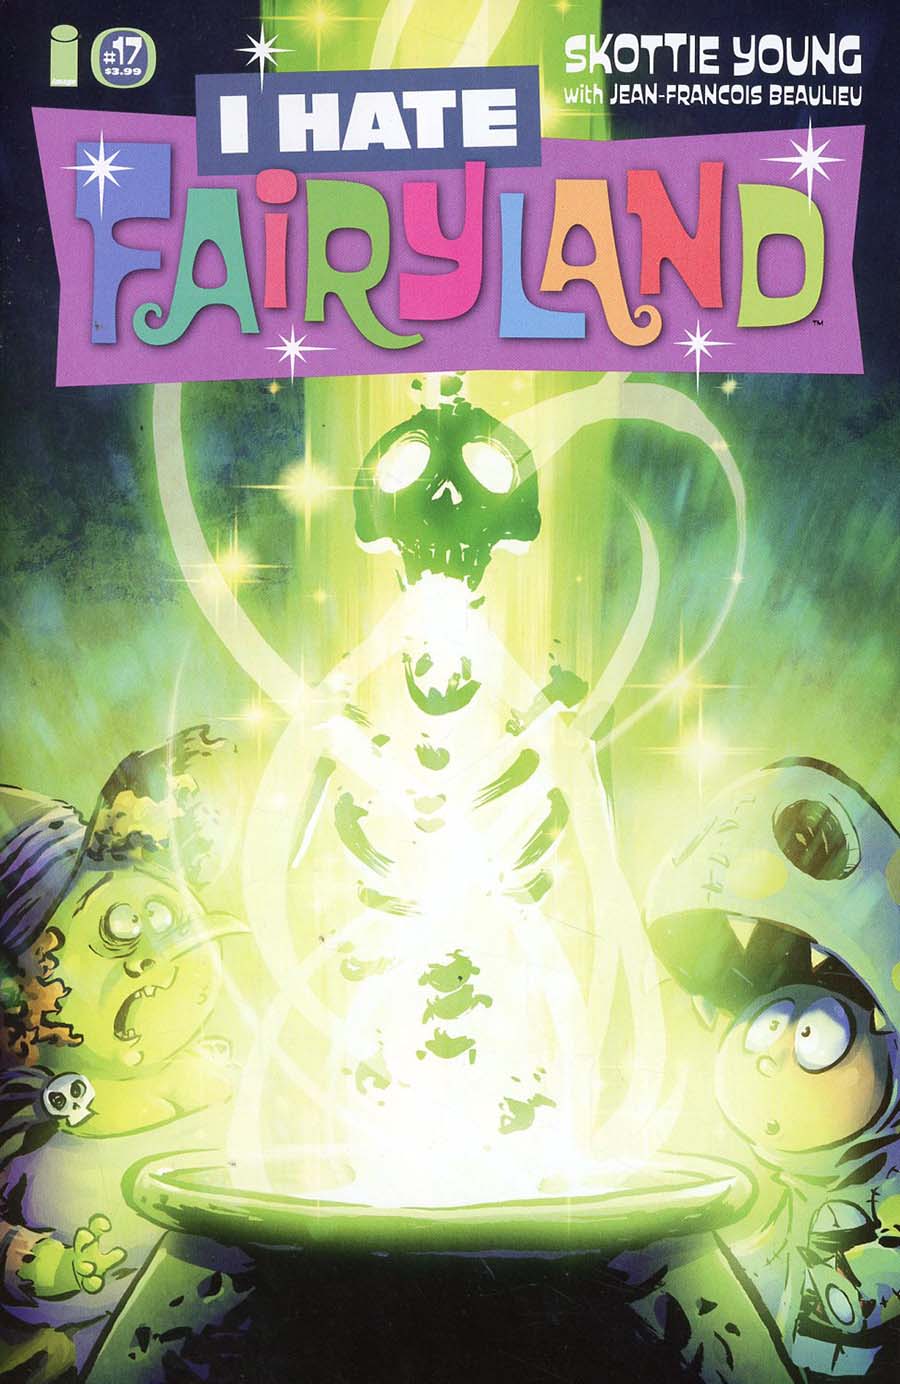 I Hate Fairyland #17 Cover A Regular Skottie Young Cover